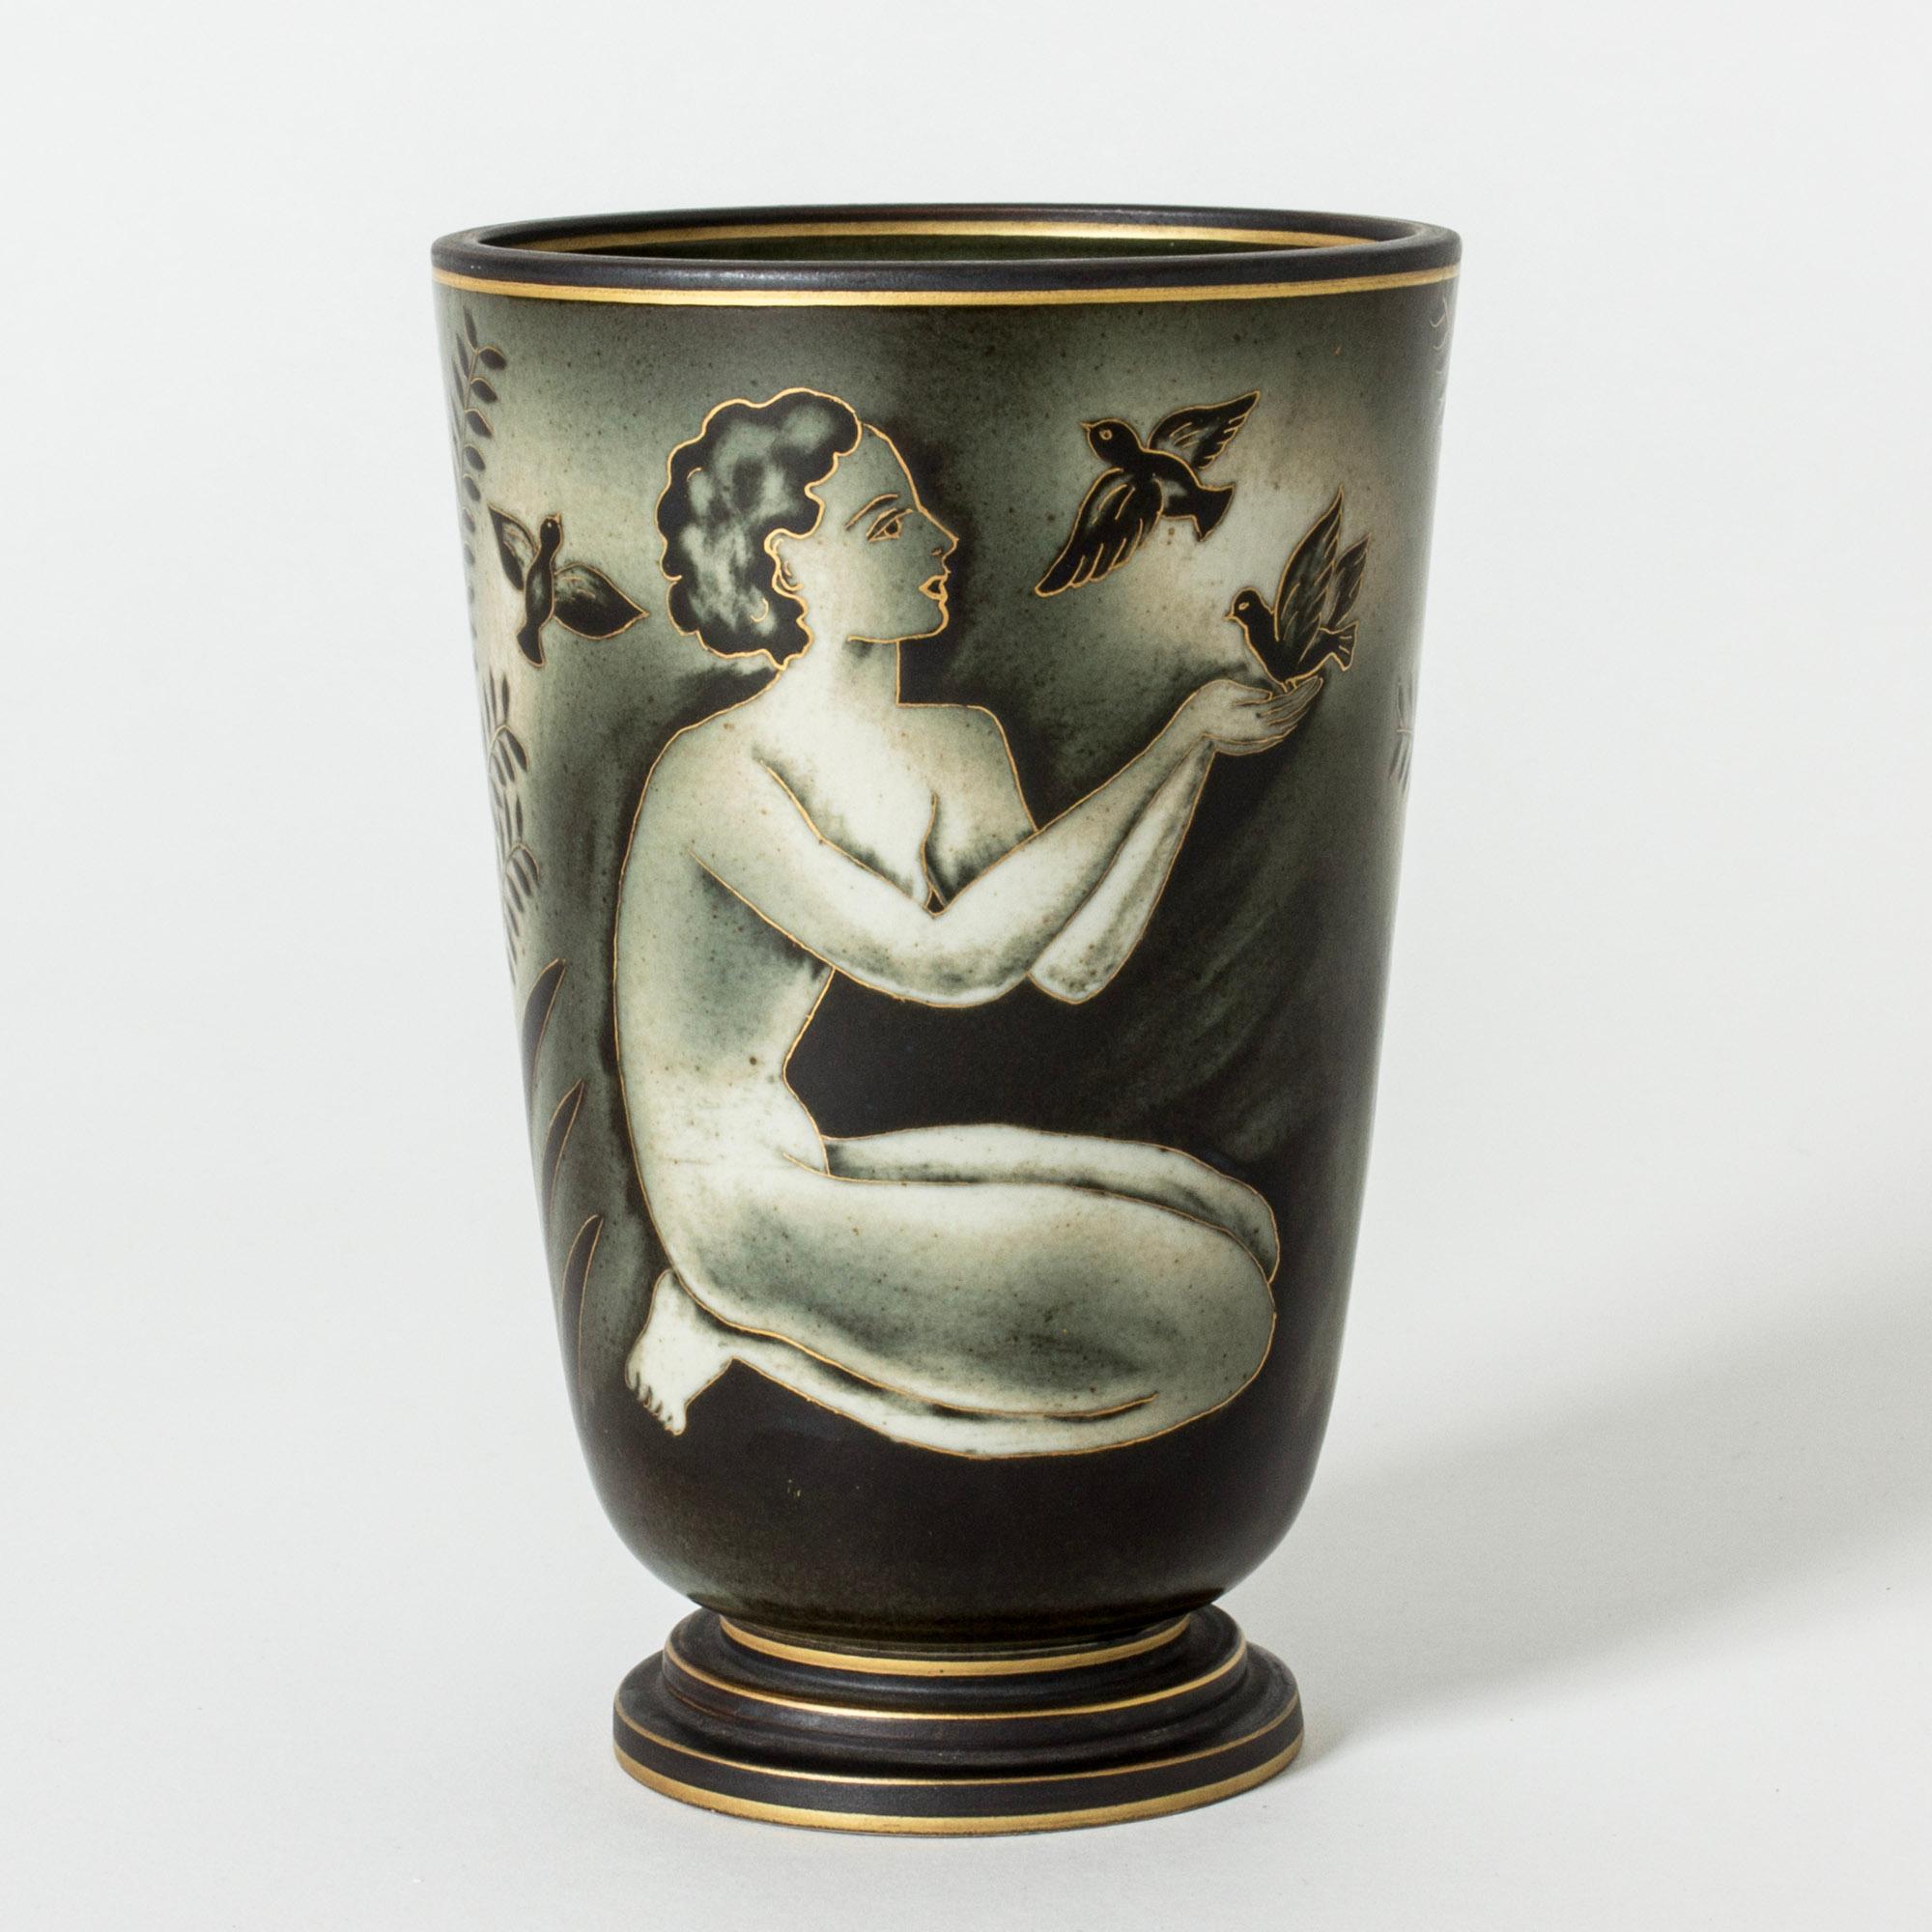 Lovely stoneware vase by Gunnar Nylund, from the “Flambé” series. Beautiful decor of women among leaves and birds. Gold decor accentuates the women’s features as well as the top and base of the vase.

Gunnar Nylund was one of the most influential